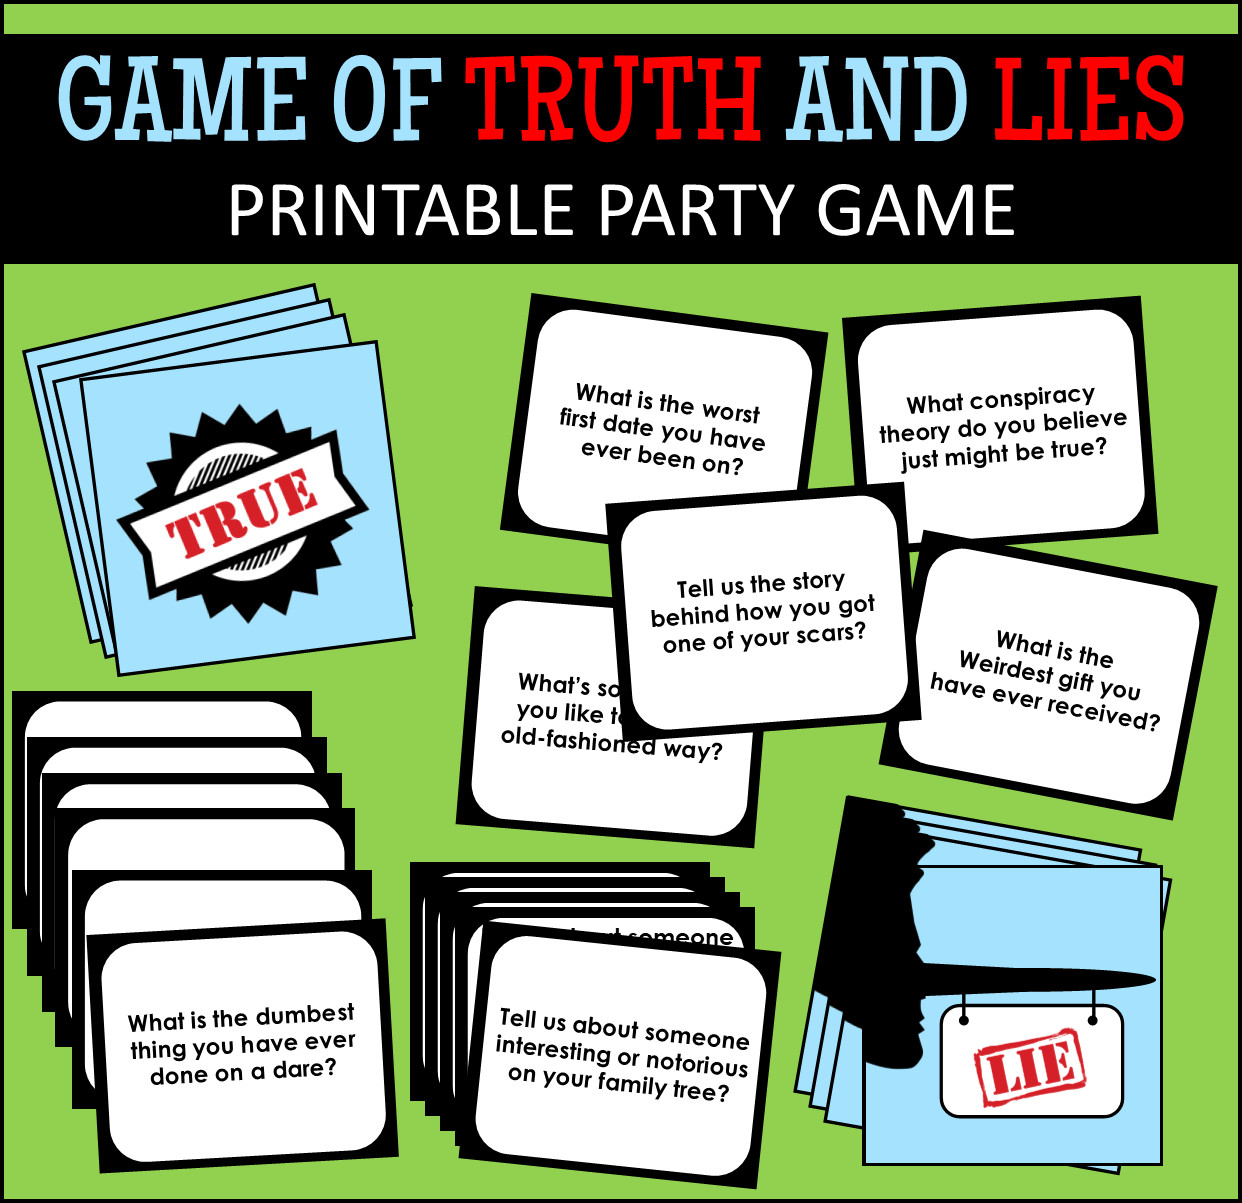 Dinner Party Games Ideas
 Top Adult Dinner Party Games to Liven Up Your Next Dinner